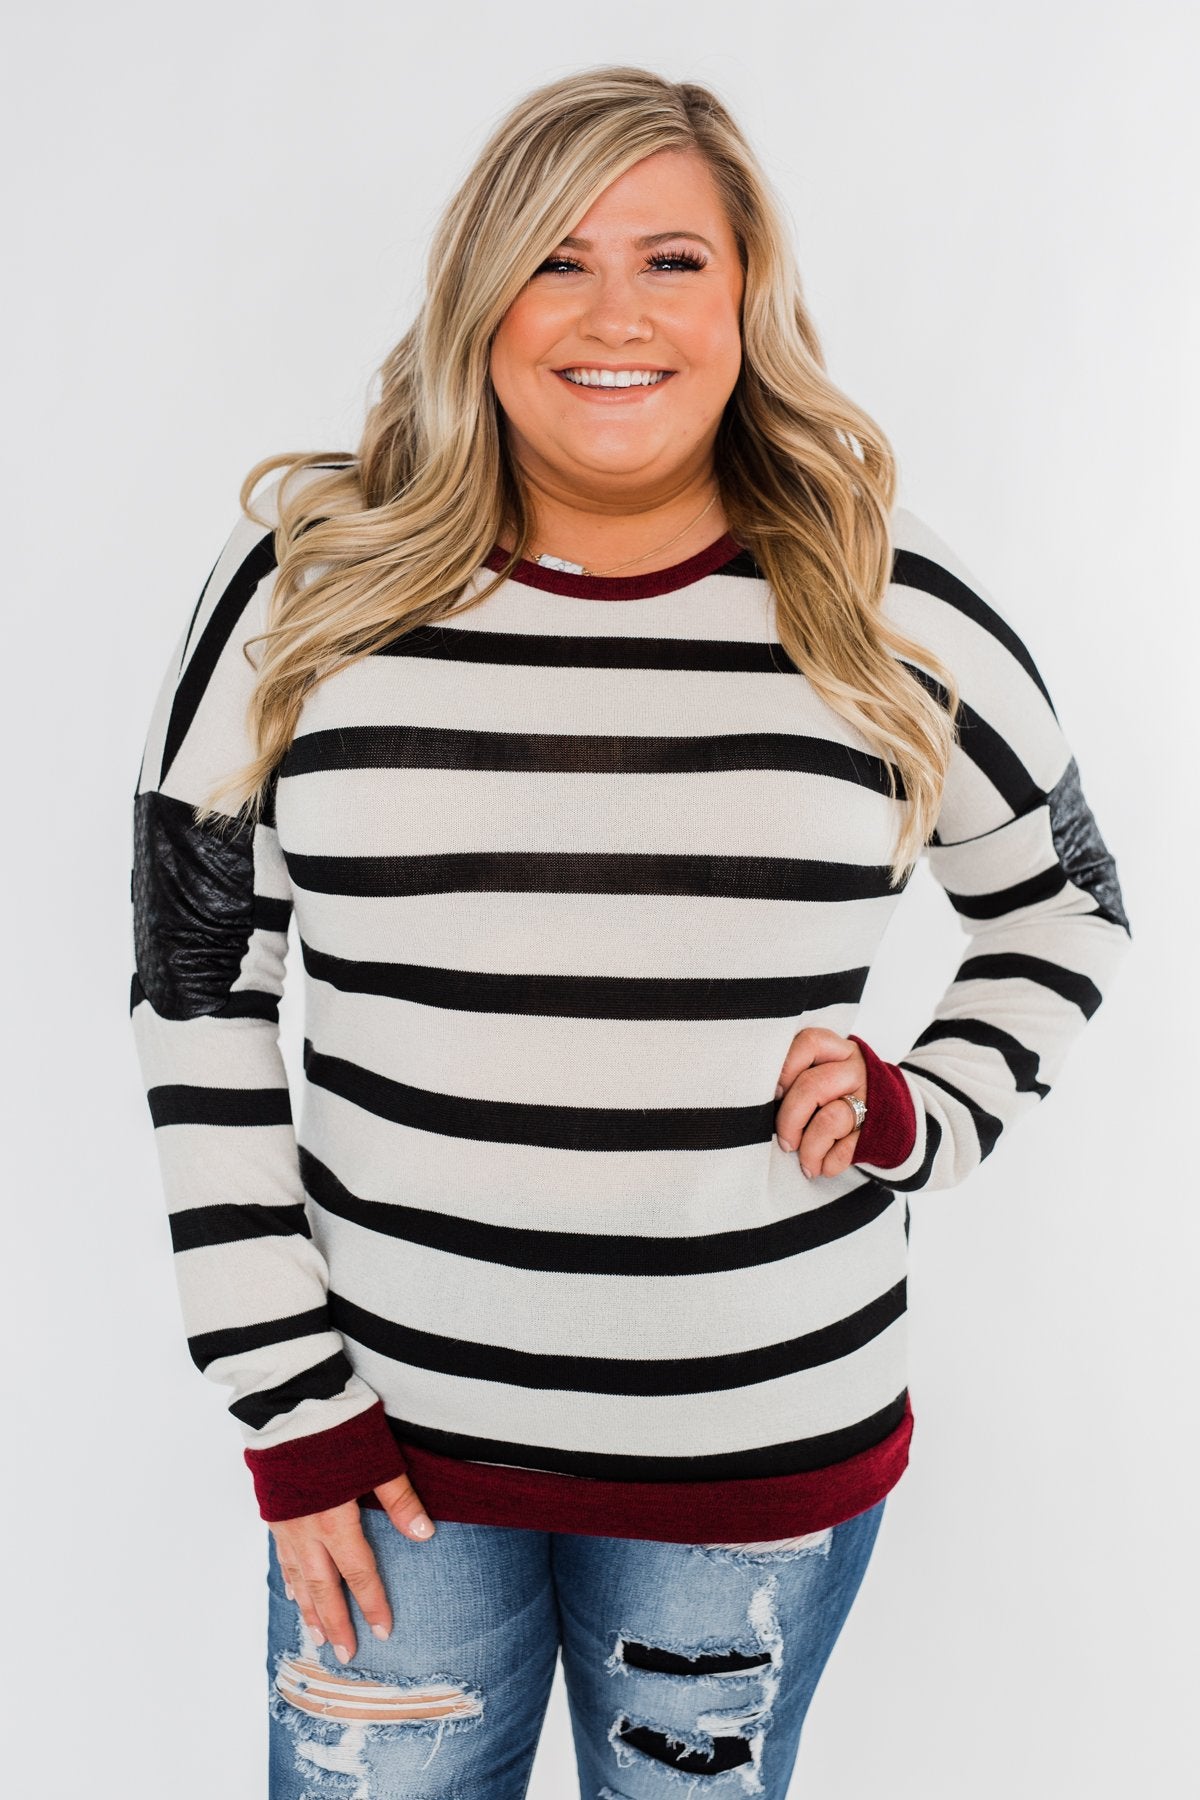 You Got it Bad Striped Top- Deep Red – The Pulse Boutique